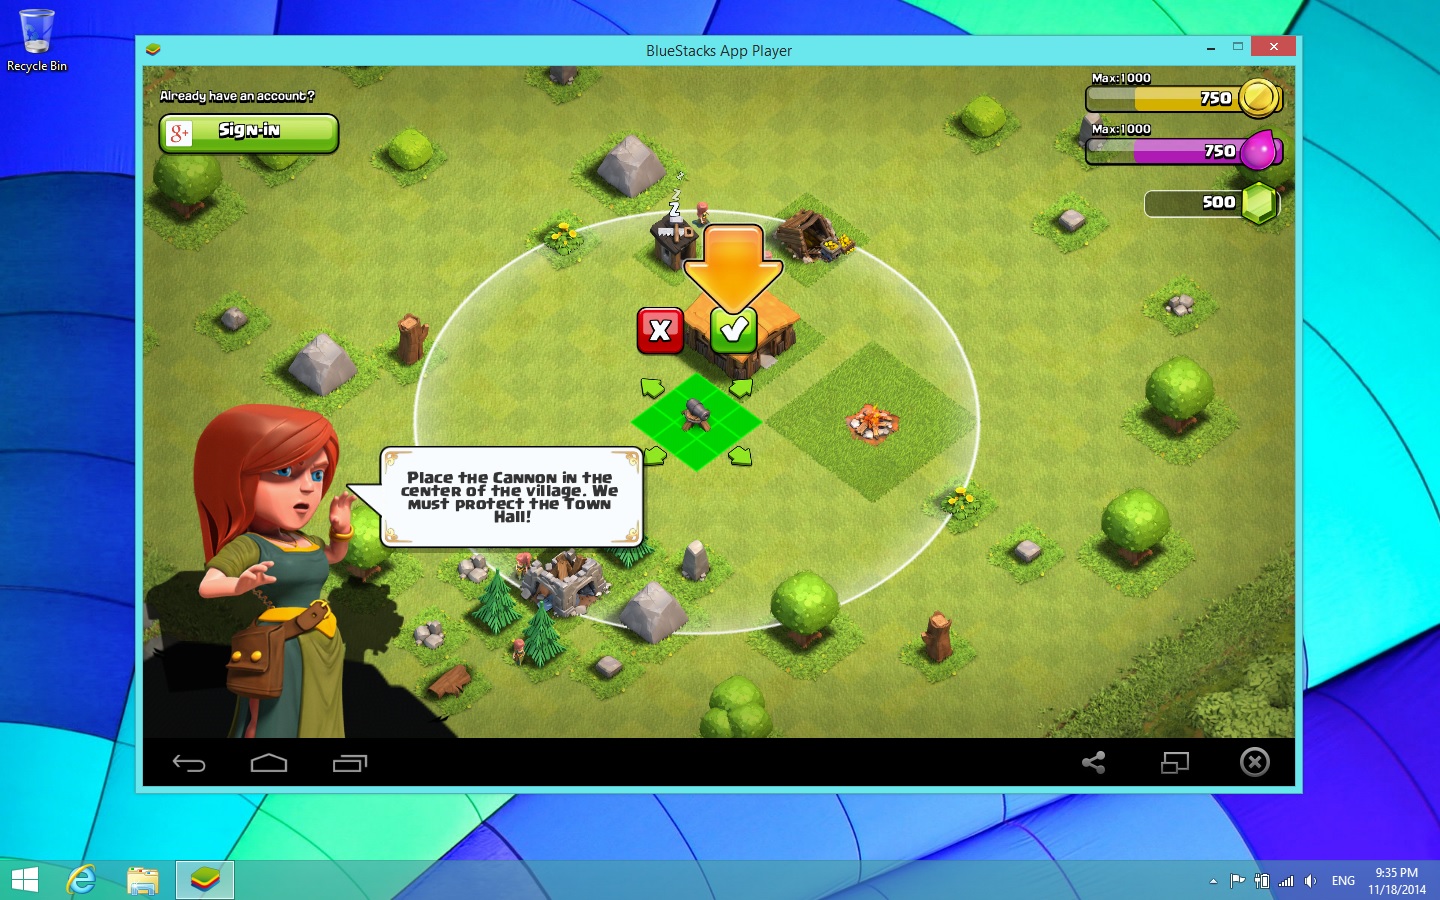 how to play clash of clans on pc